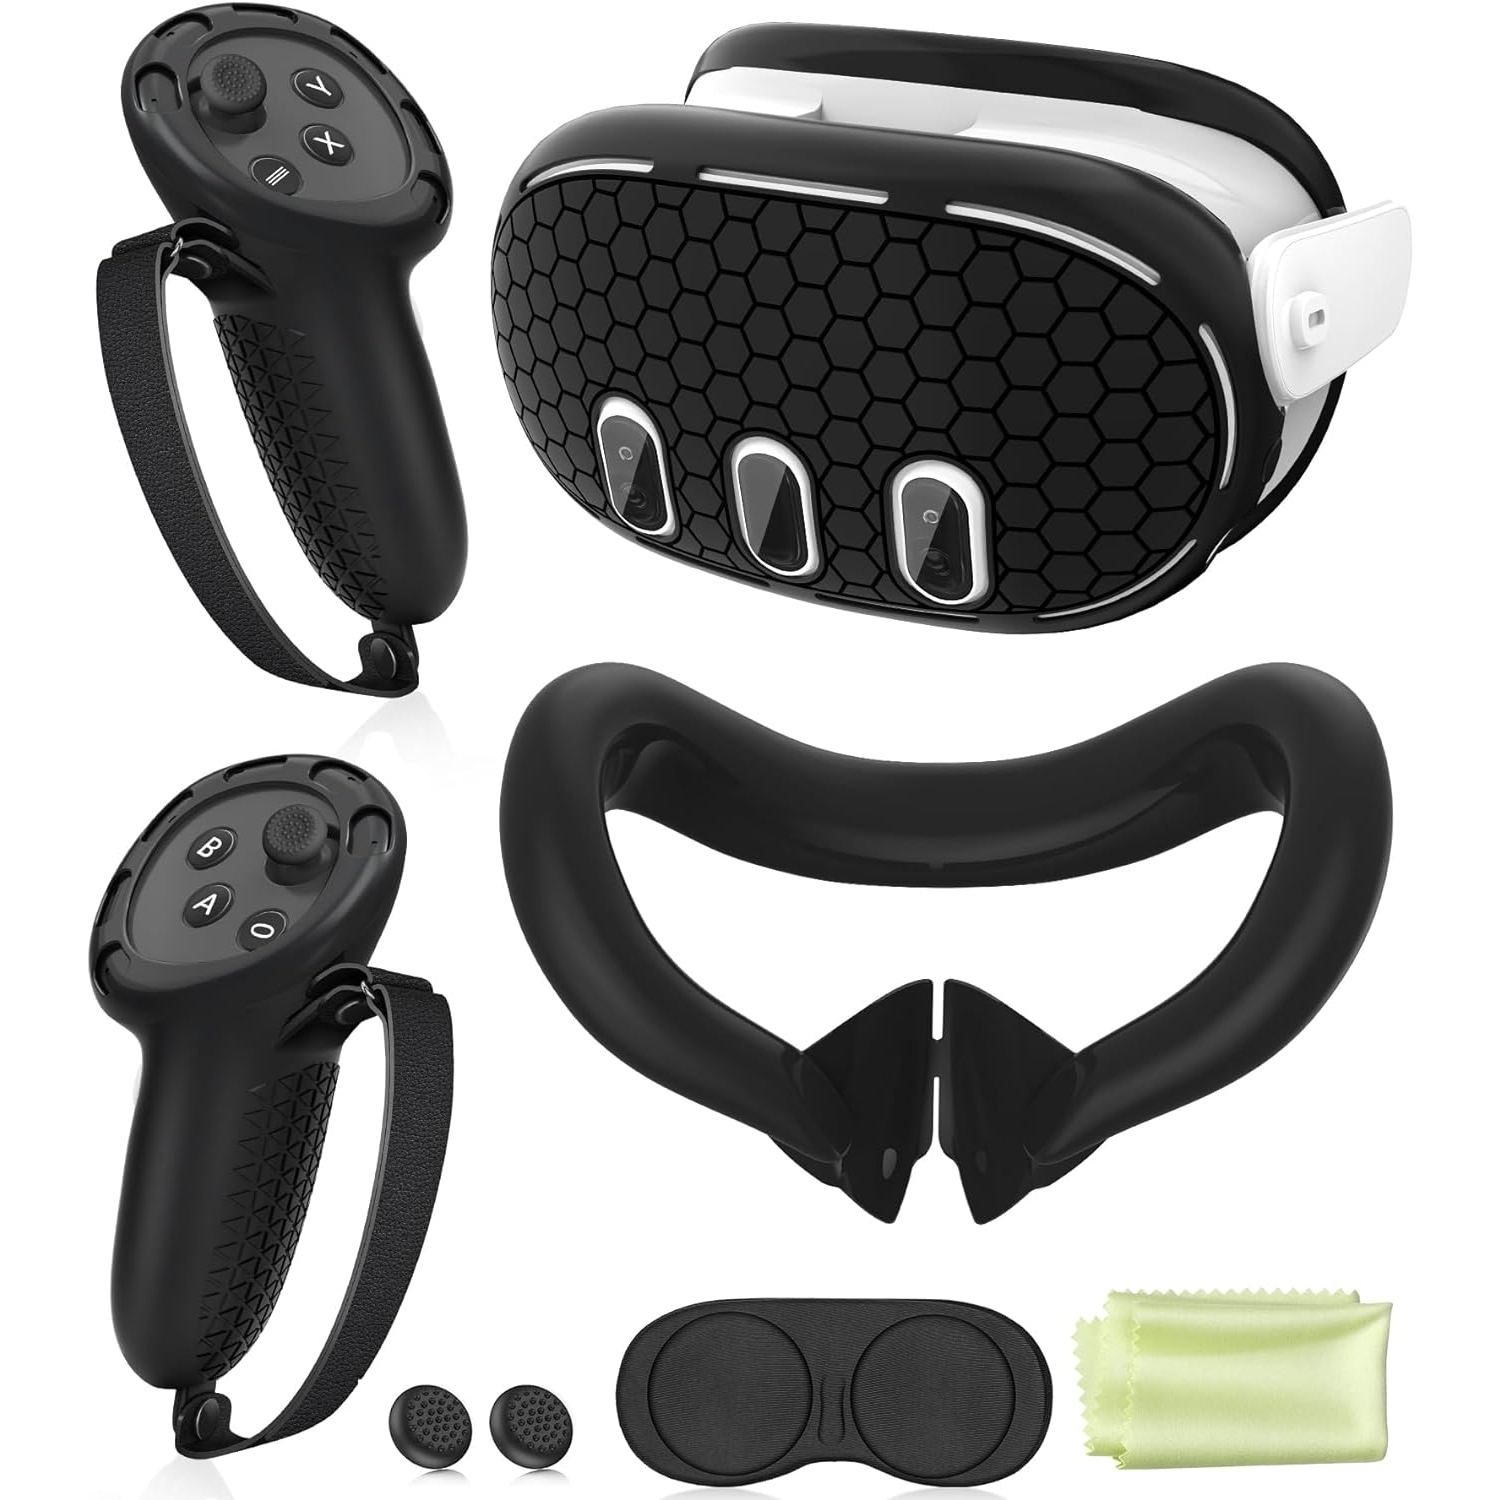 Silicone Cover Set Compatible with Oculus/Meta Quest 3, VR Accessories Protective Cover Includes Controller Grips, Front Shell Headset Cover and Face Cover, Lens Protector